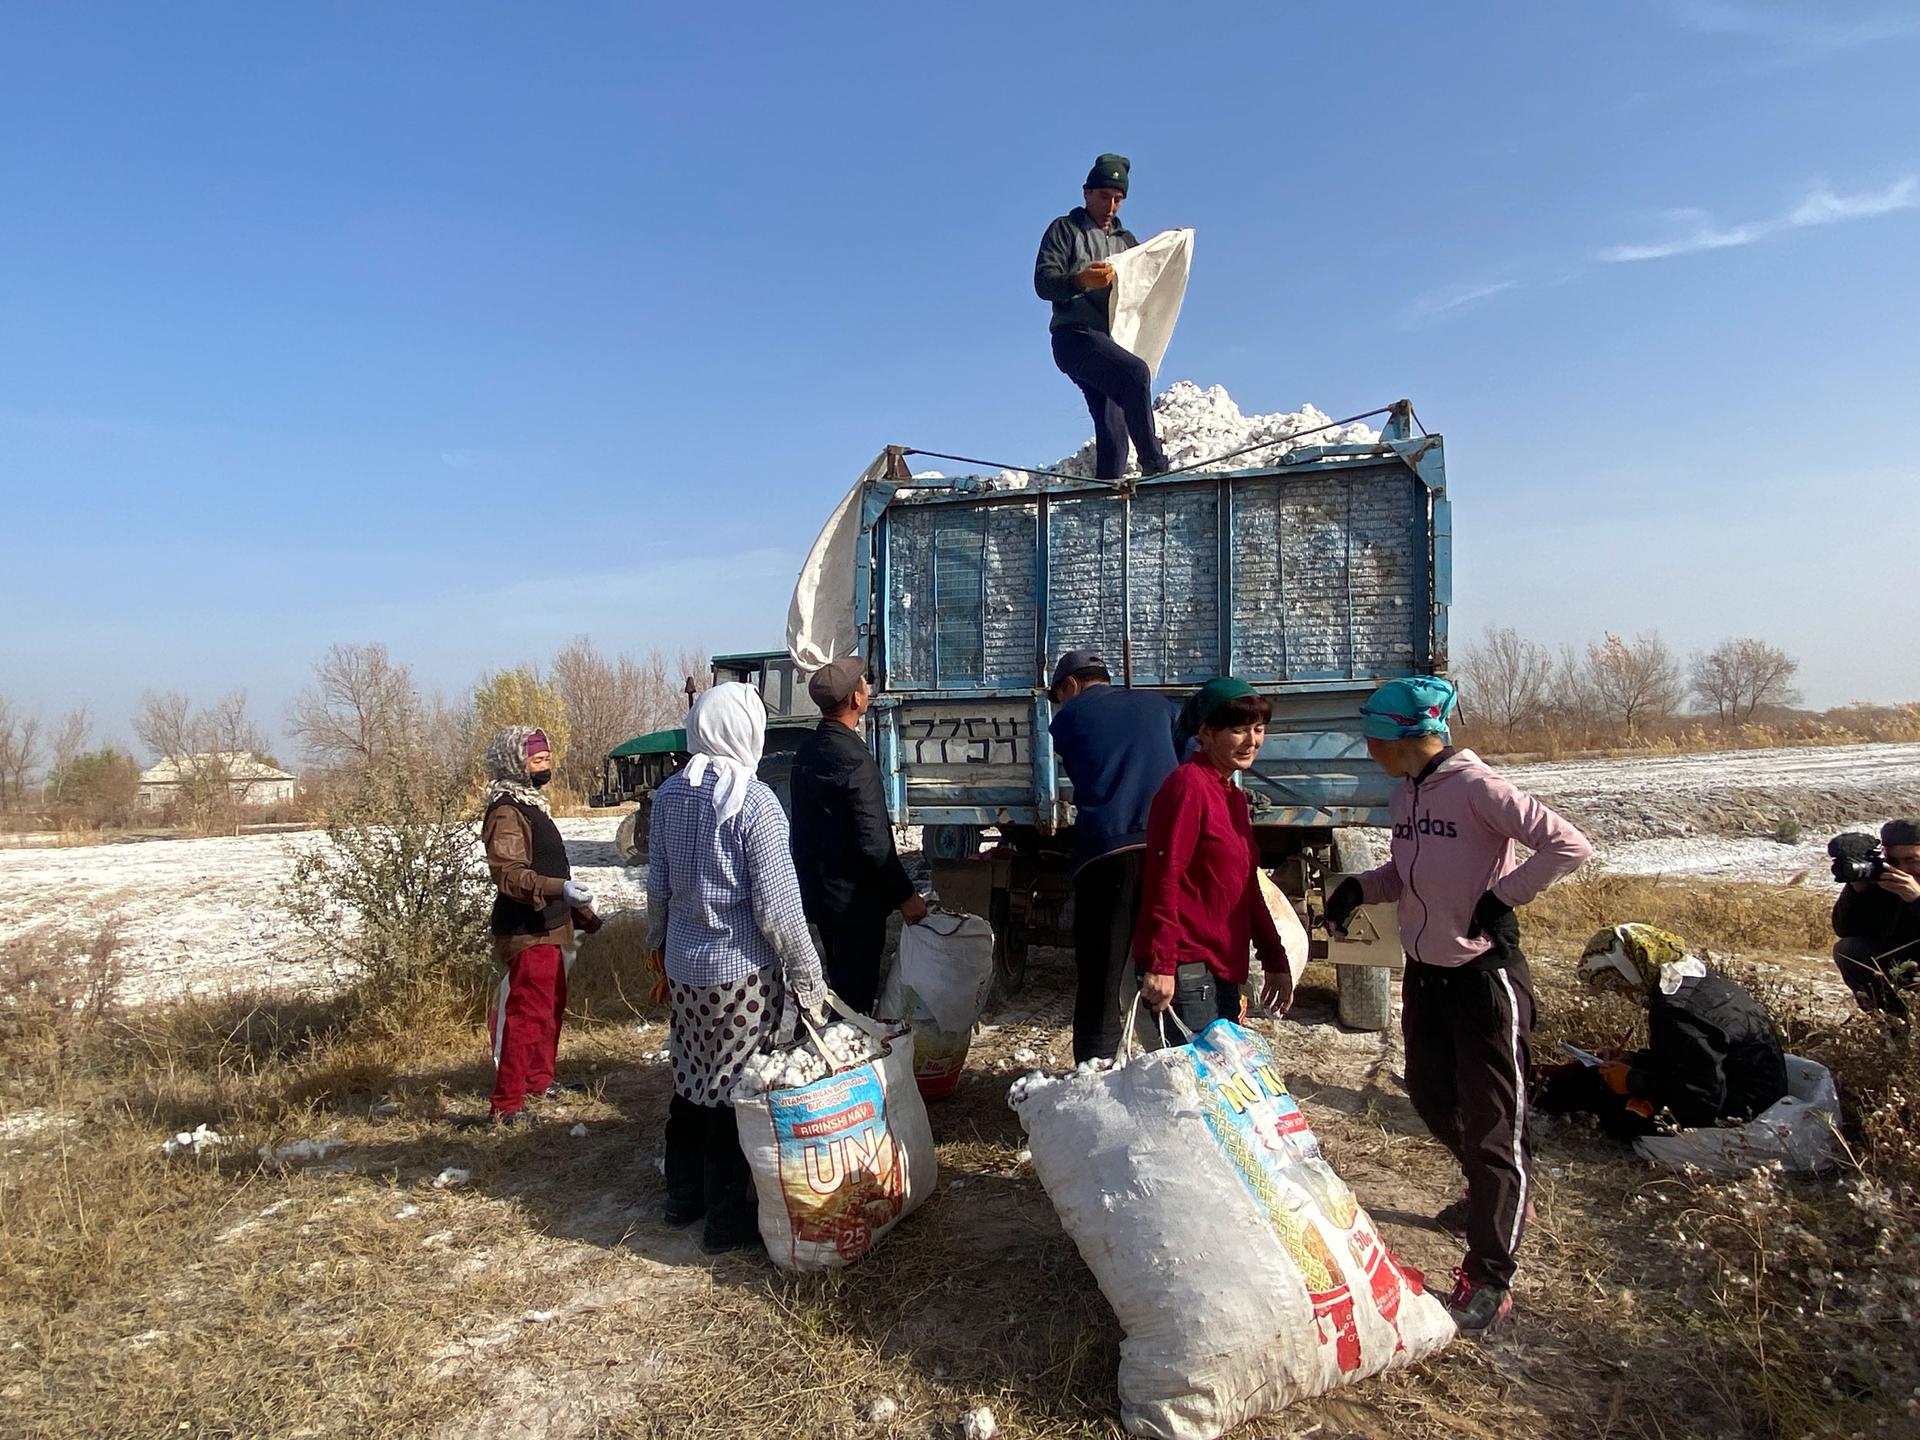 Uzbek workers line up to weigh bundles of cotton that will eventually be spun into yarn and turned into clothing sent all over the world.